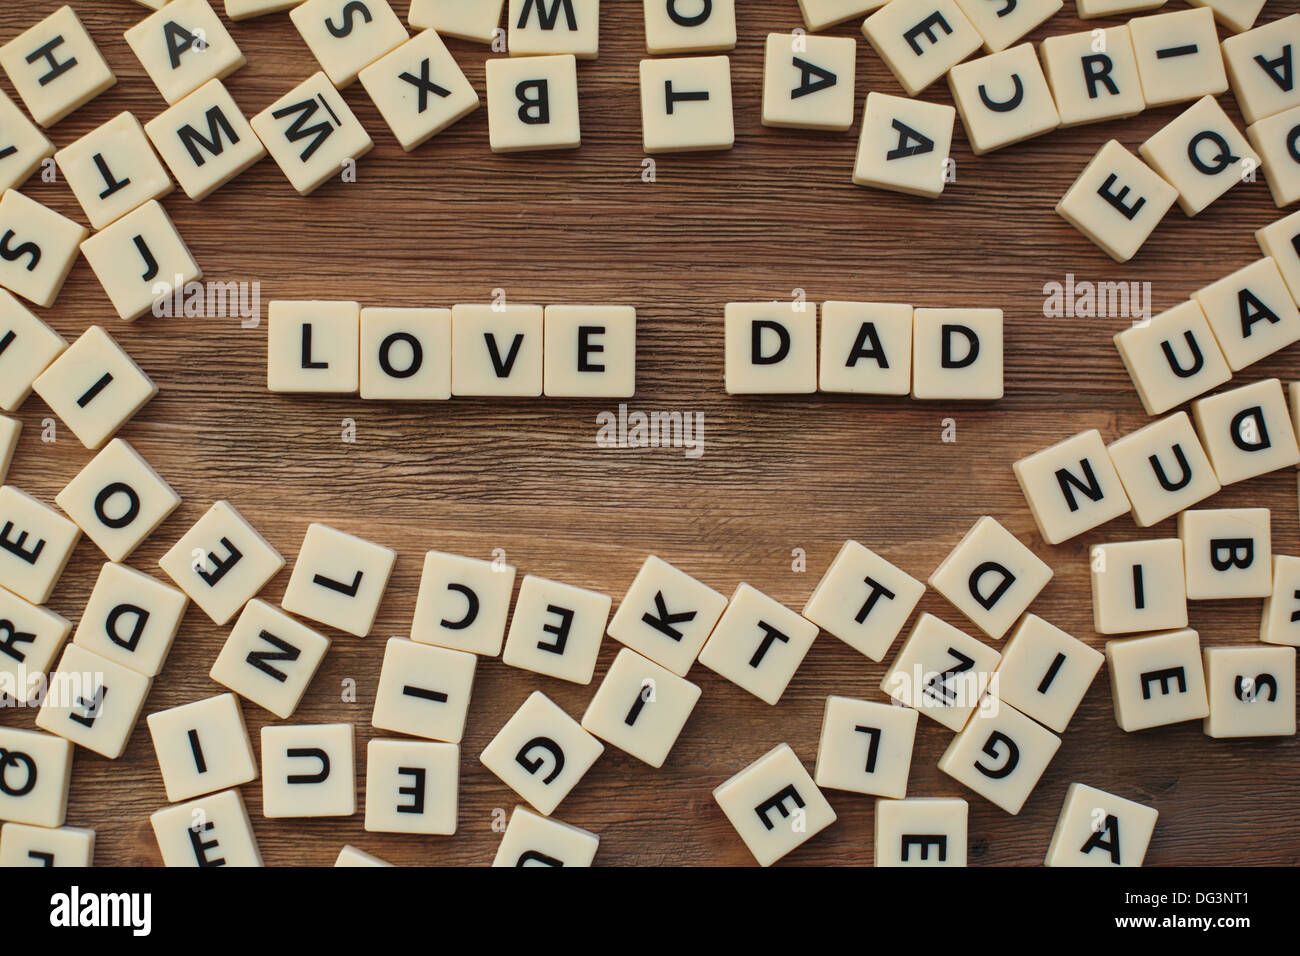 Plastic letters from a childrens' spelling game on a wooden table spell 'Love Dad' Stock Photo